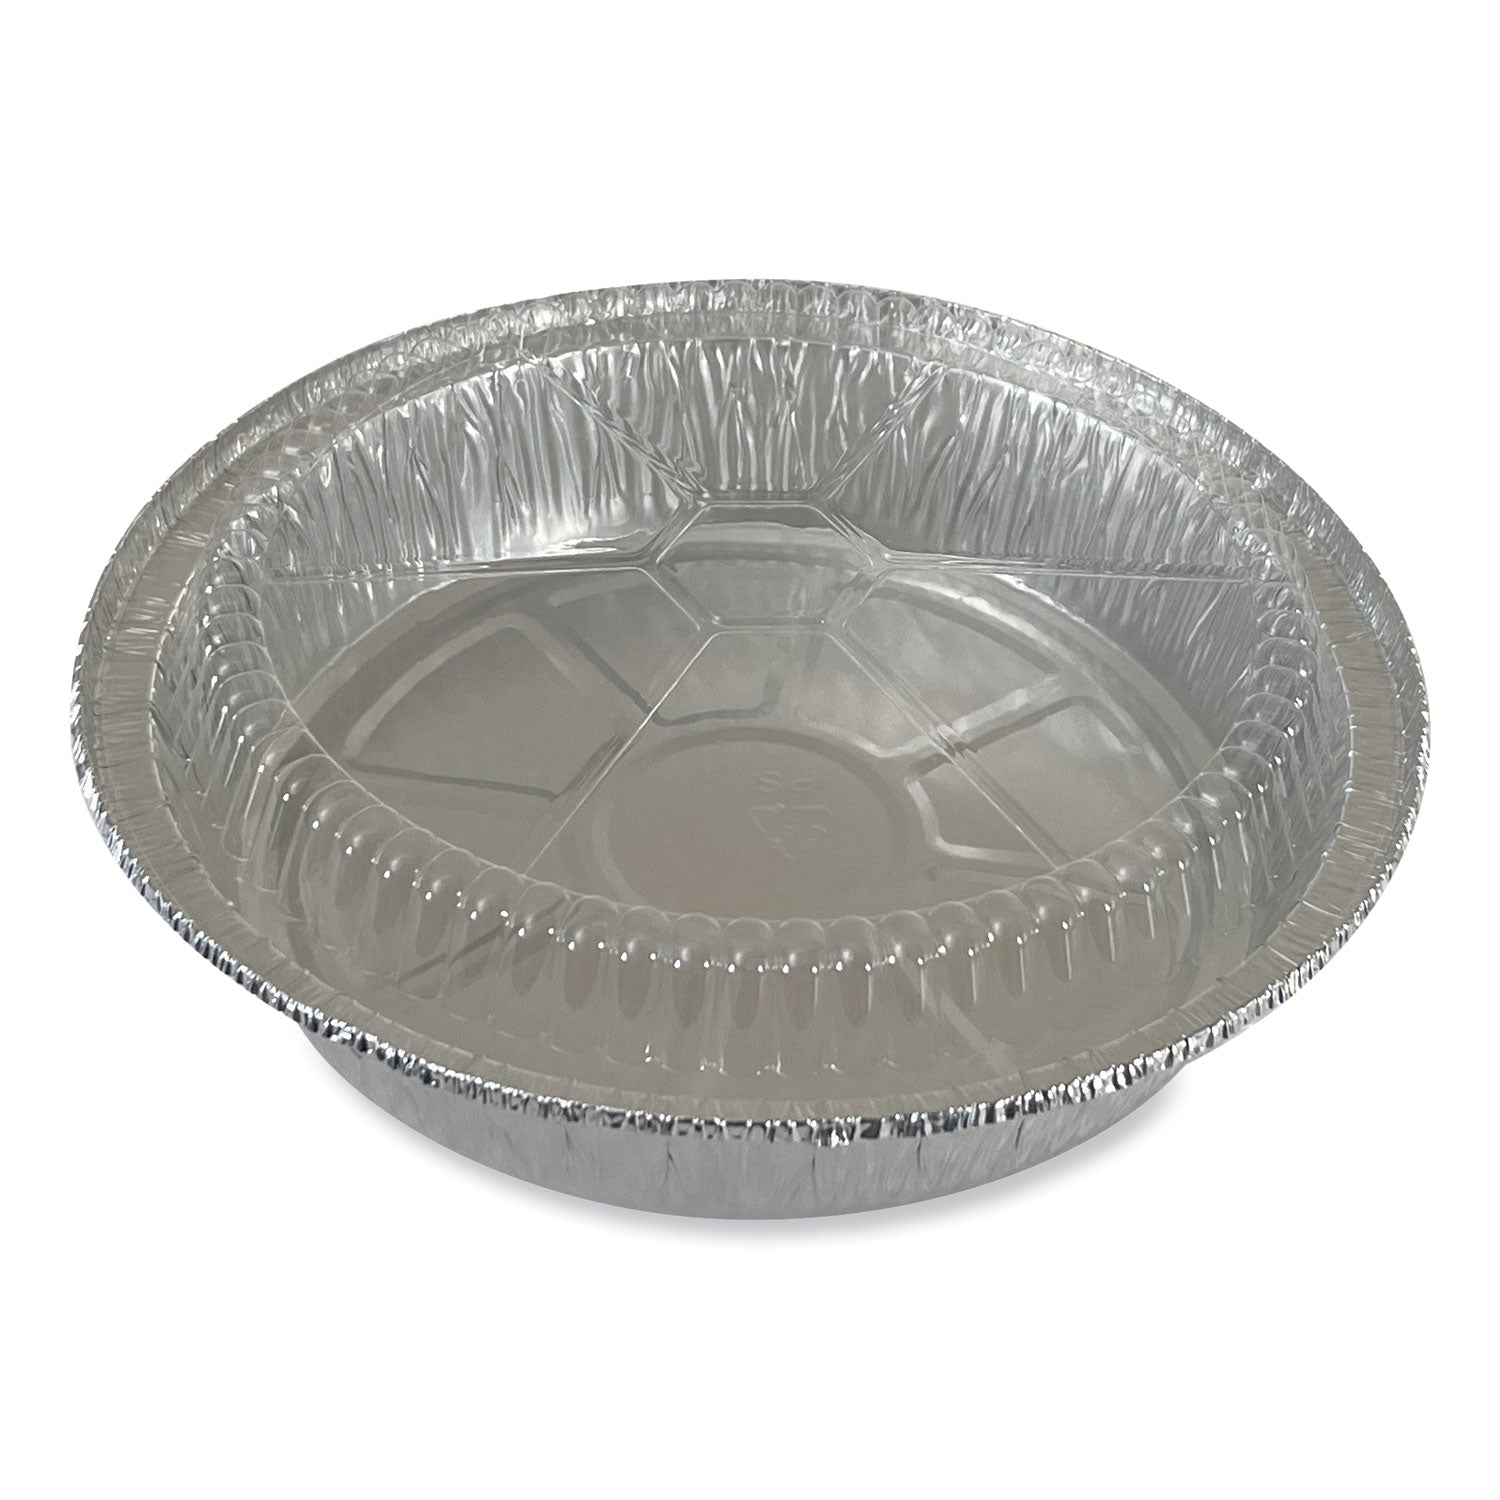 round-aluminum-to-go-container-lids-dome-lid-9-clear-plastic-500-carton_bwkround9clid - 4